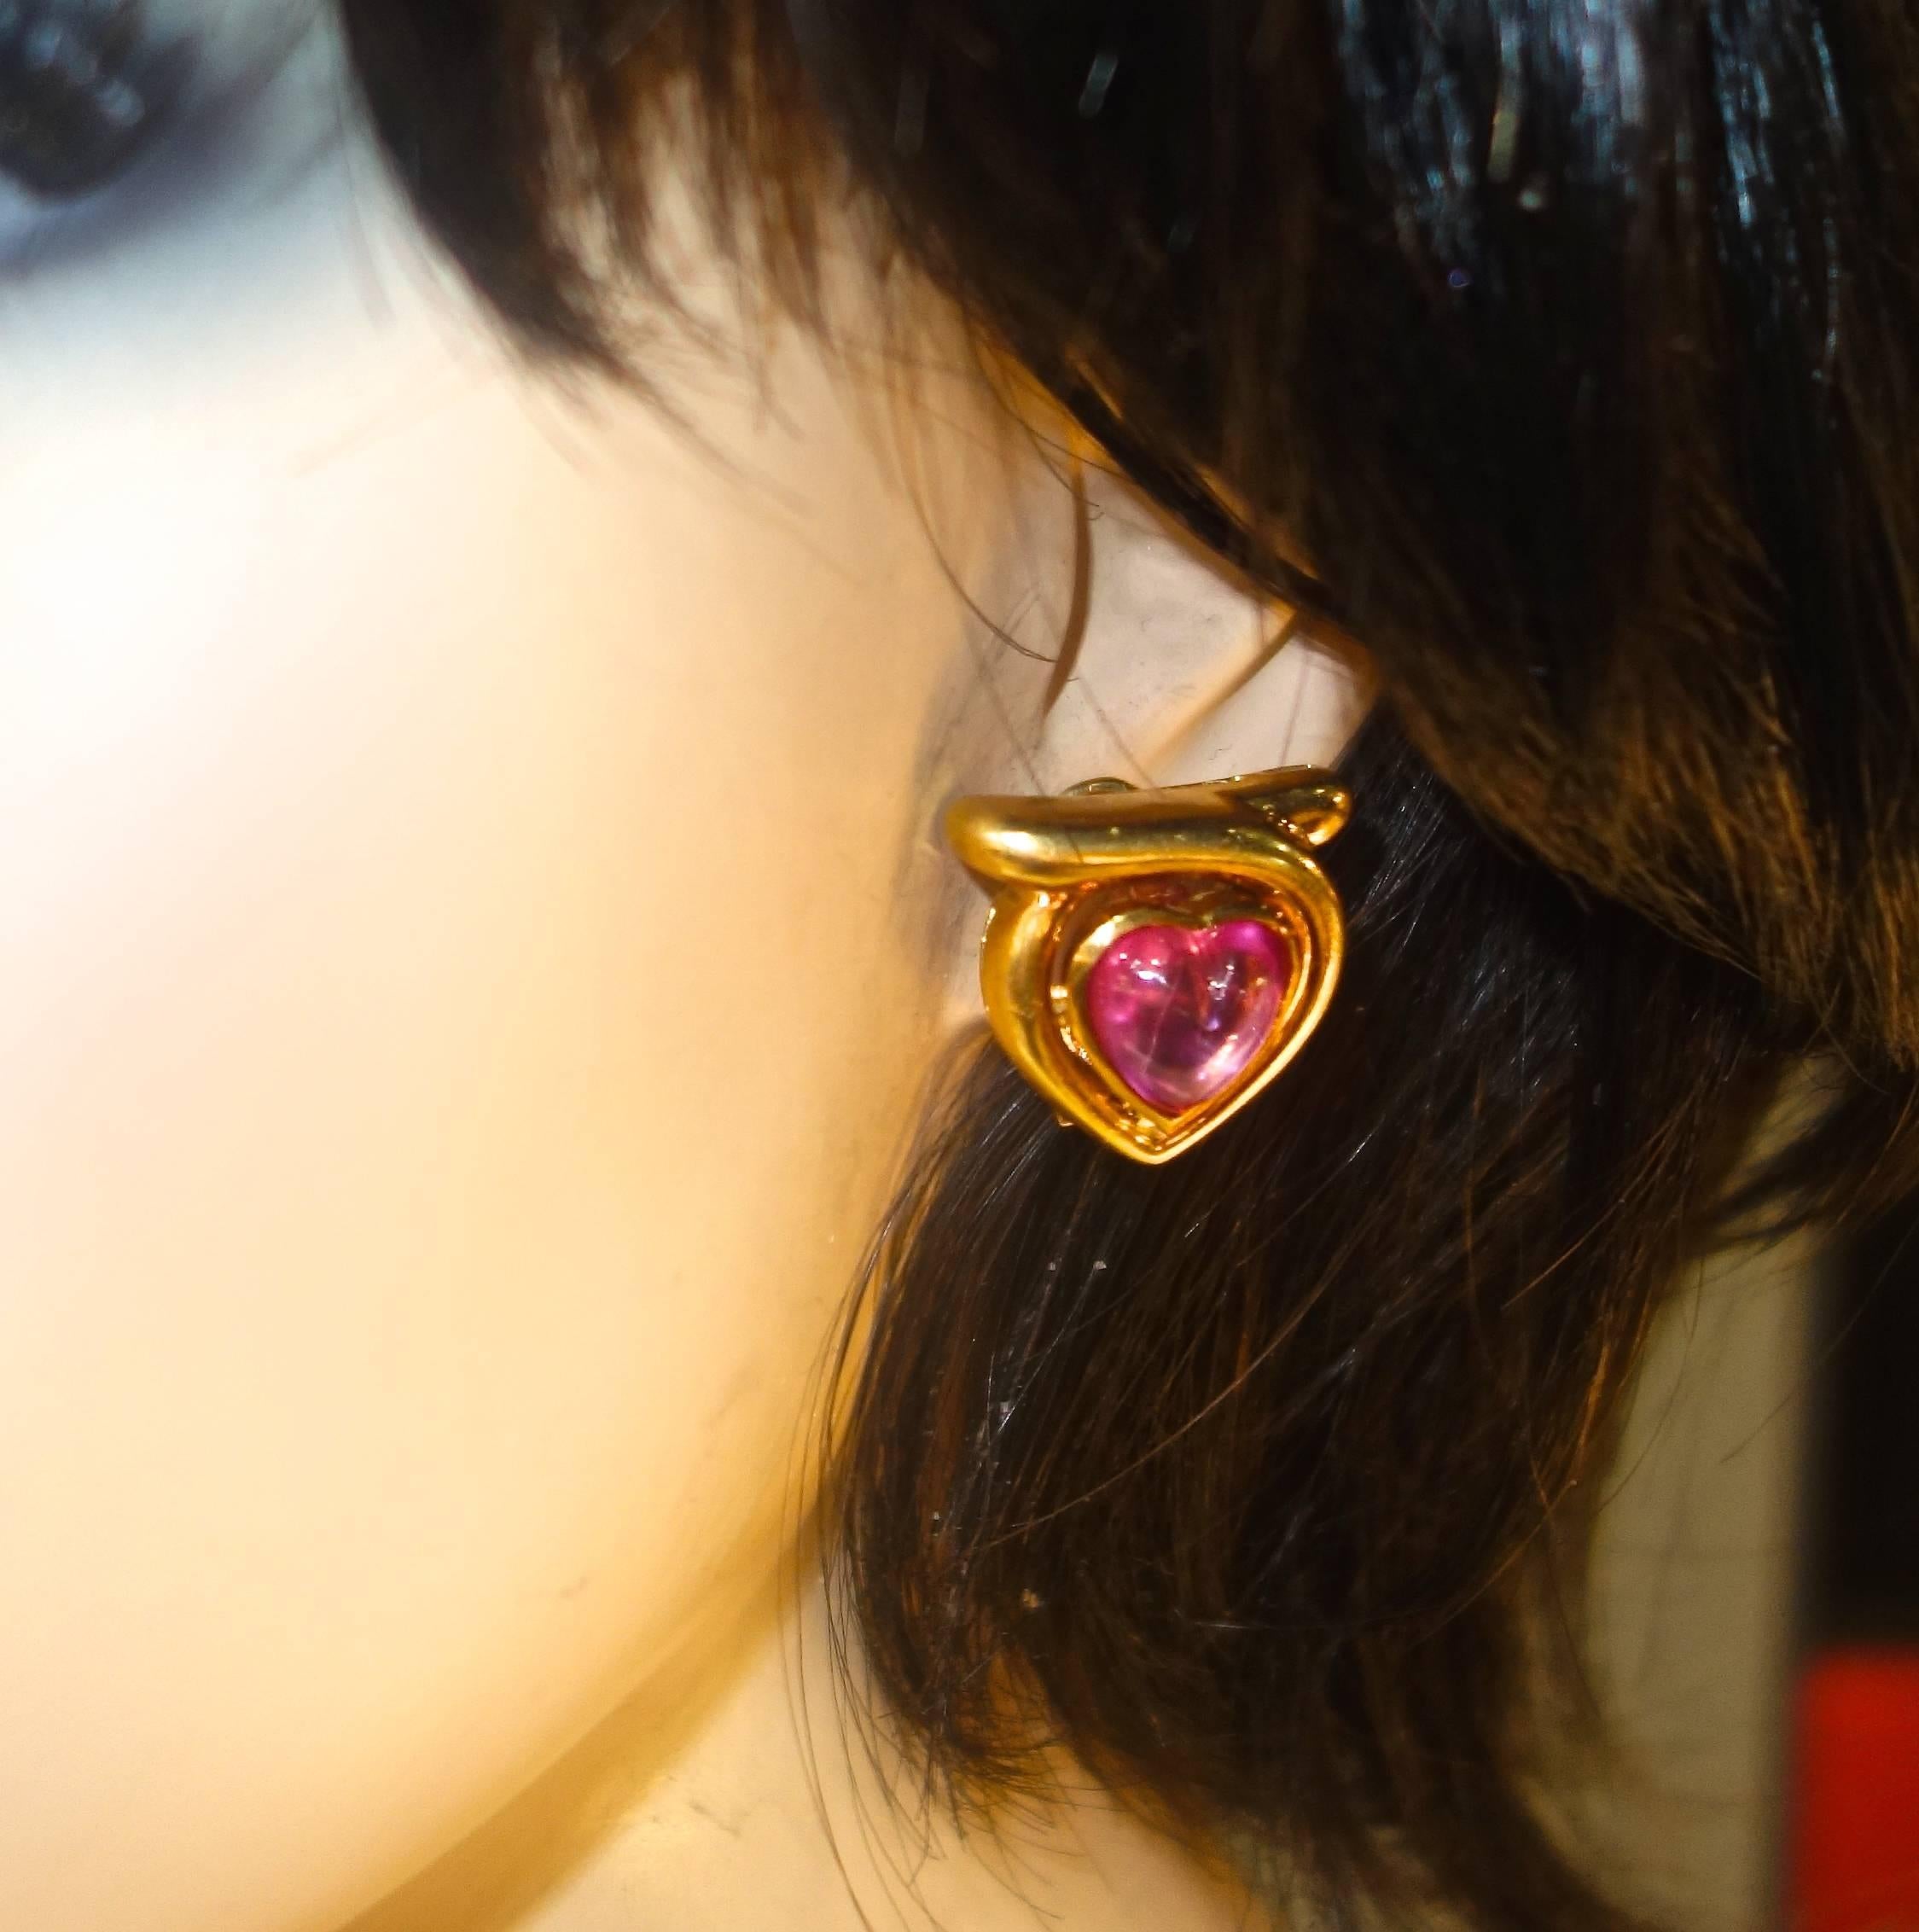 The heart shaped natural pink sapphires are a bright deep 